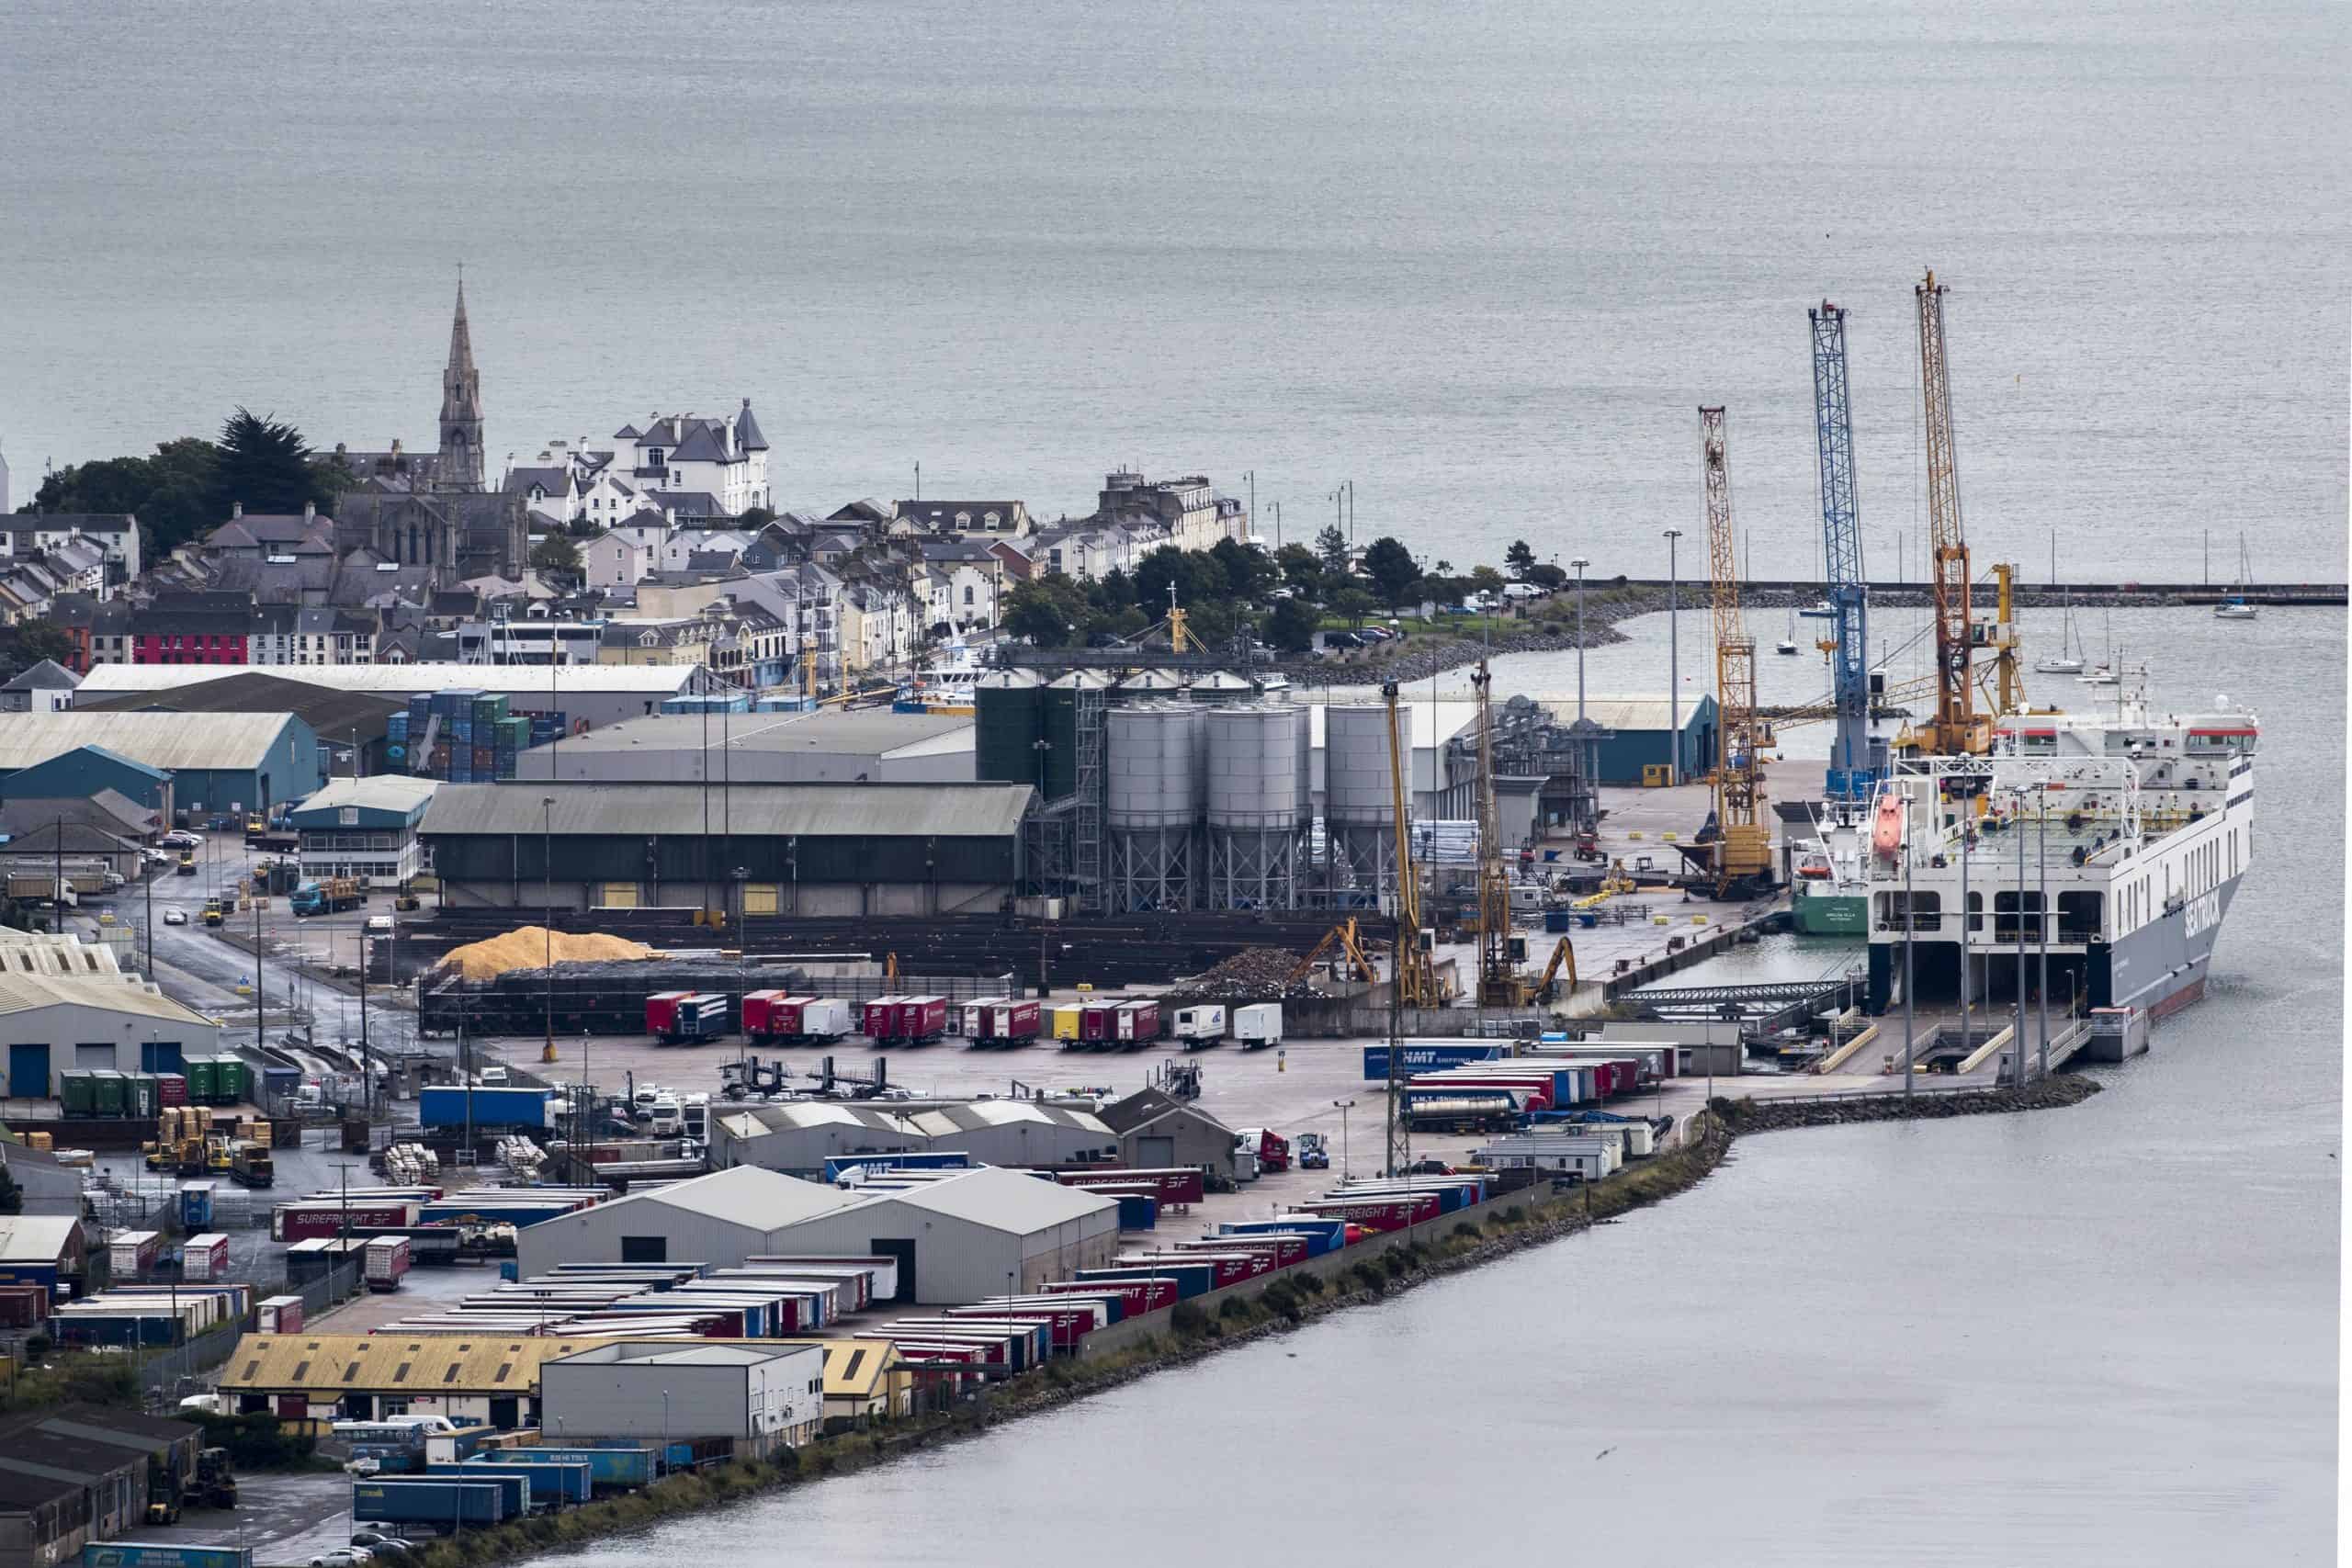 ‘It’ll not be as frictionless as I would wish it to be’ as security arrangements bolstered for new port checks